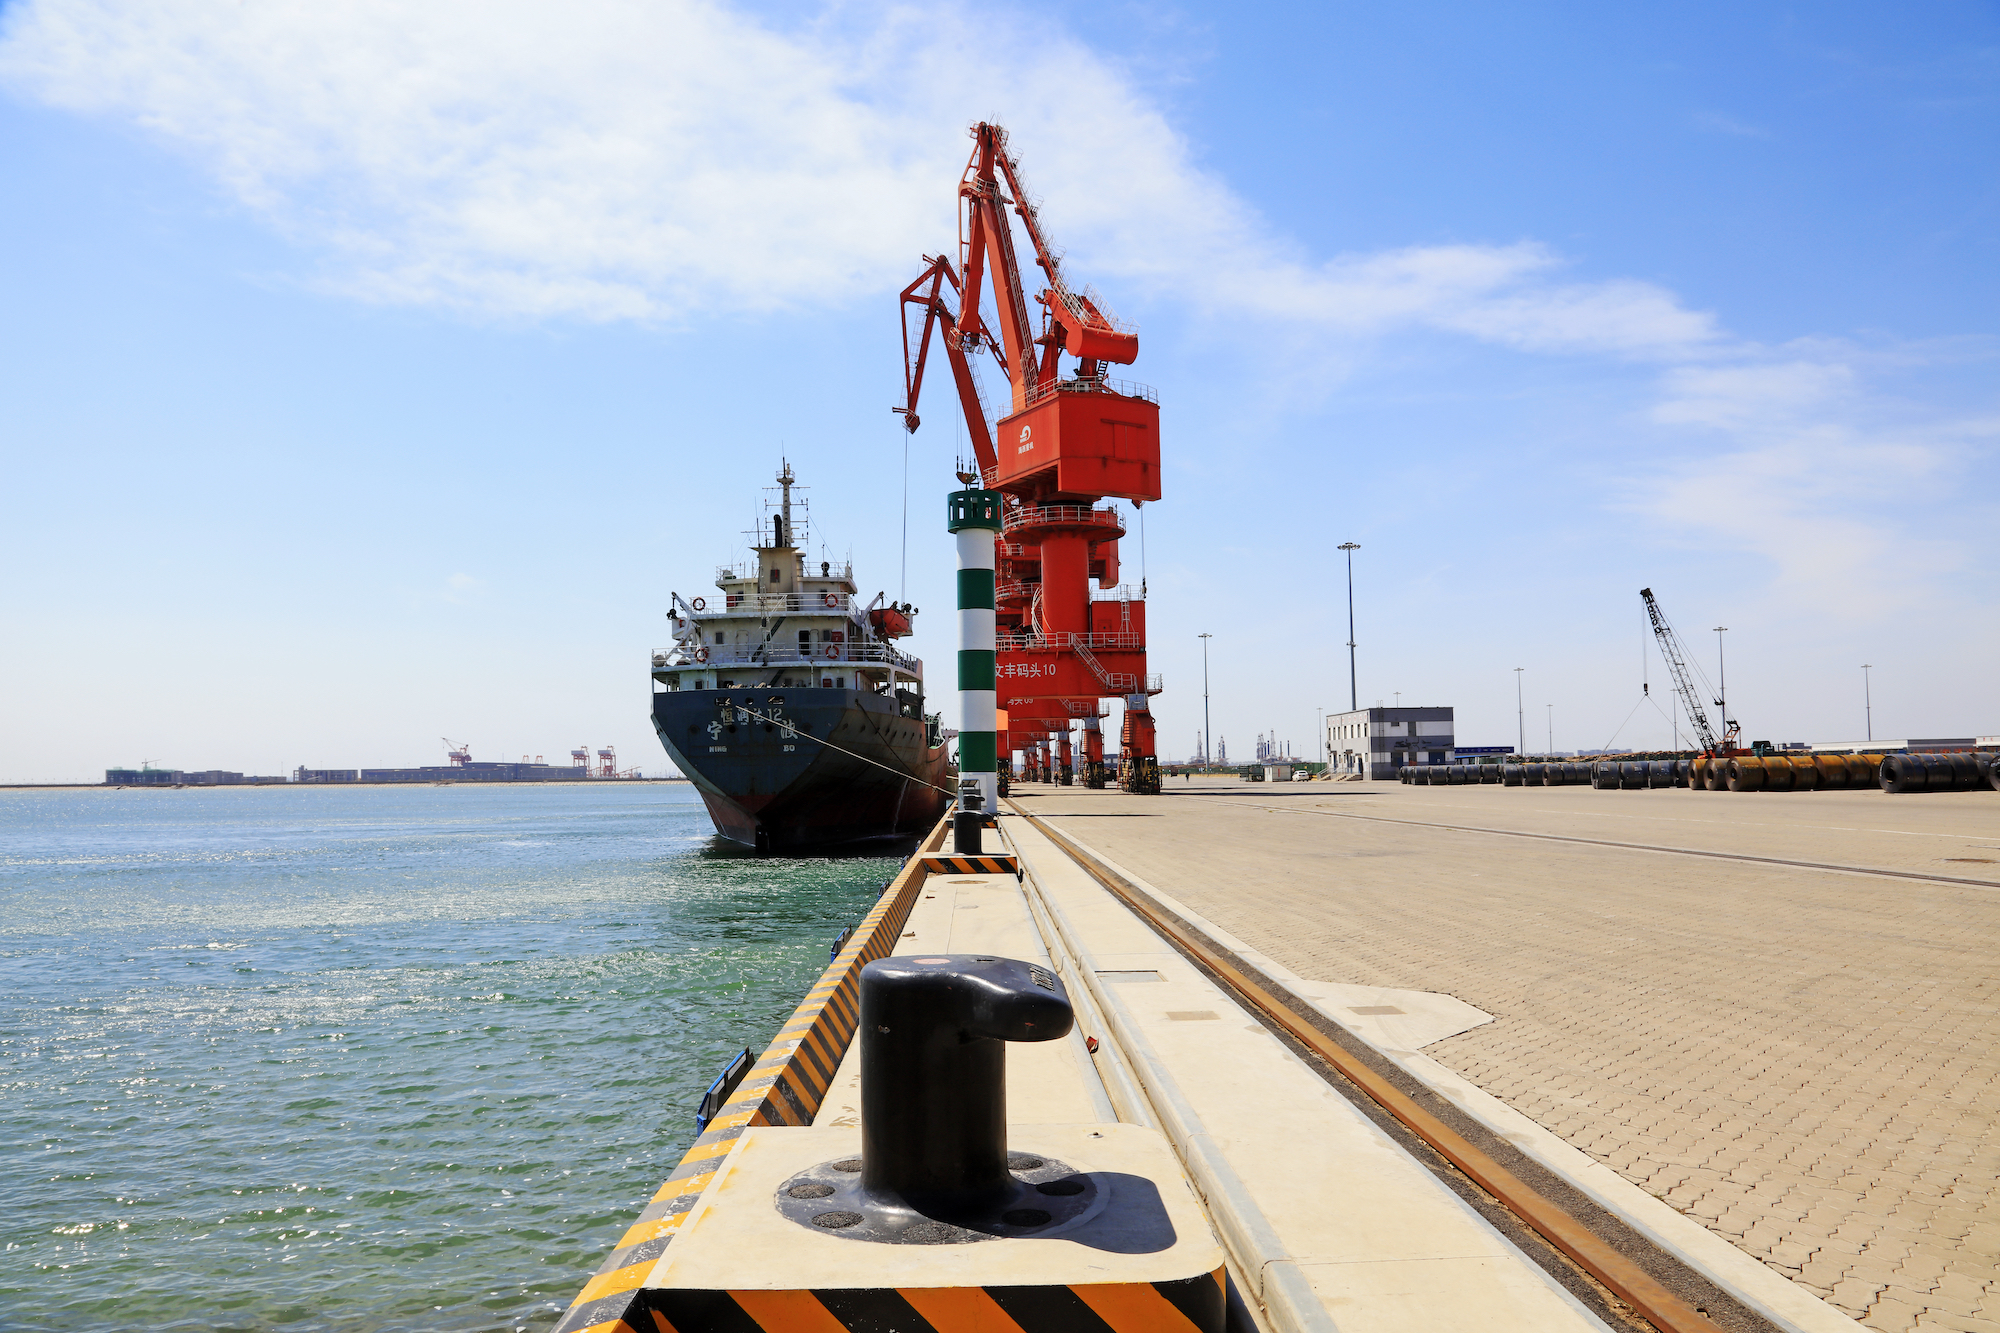 The Hebei Port Group and Brazilian iron ore producer Vale plan to boost collaboration